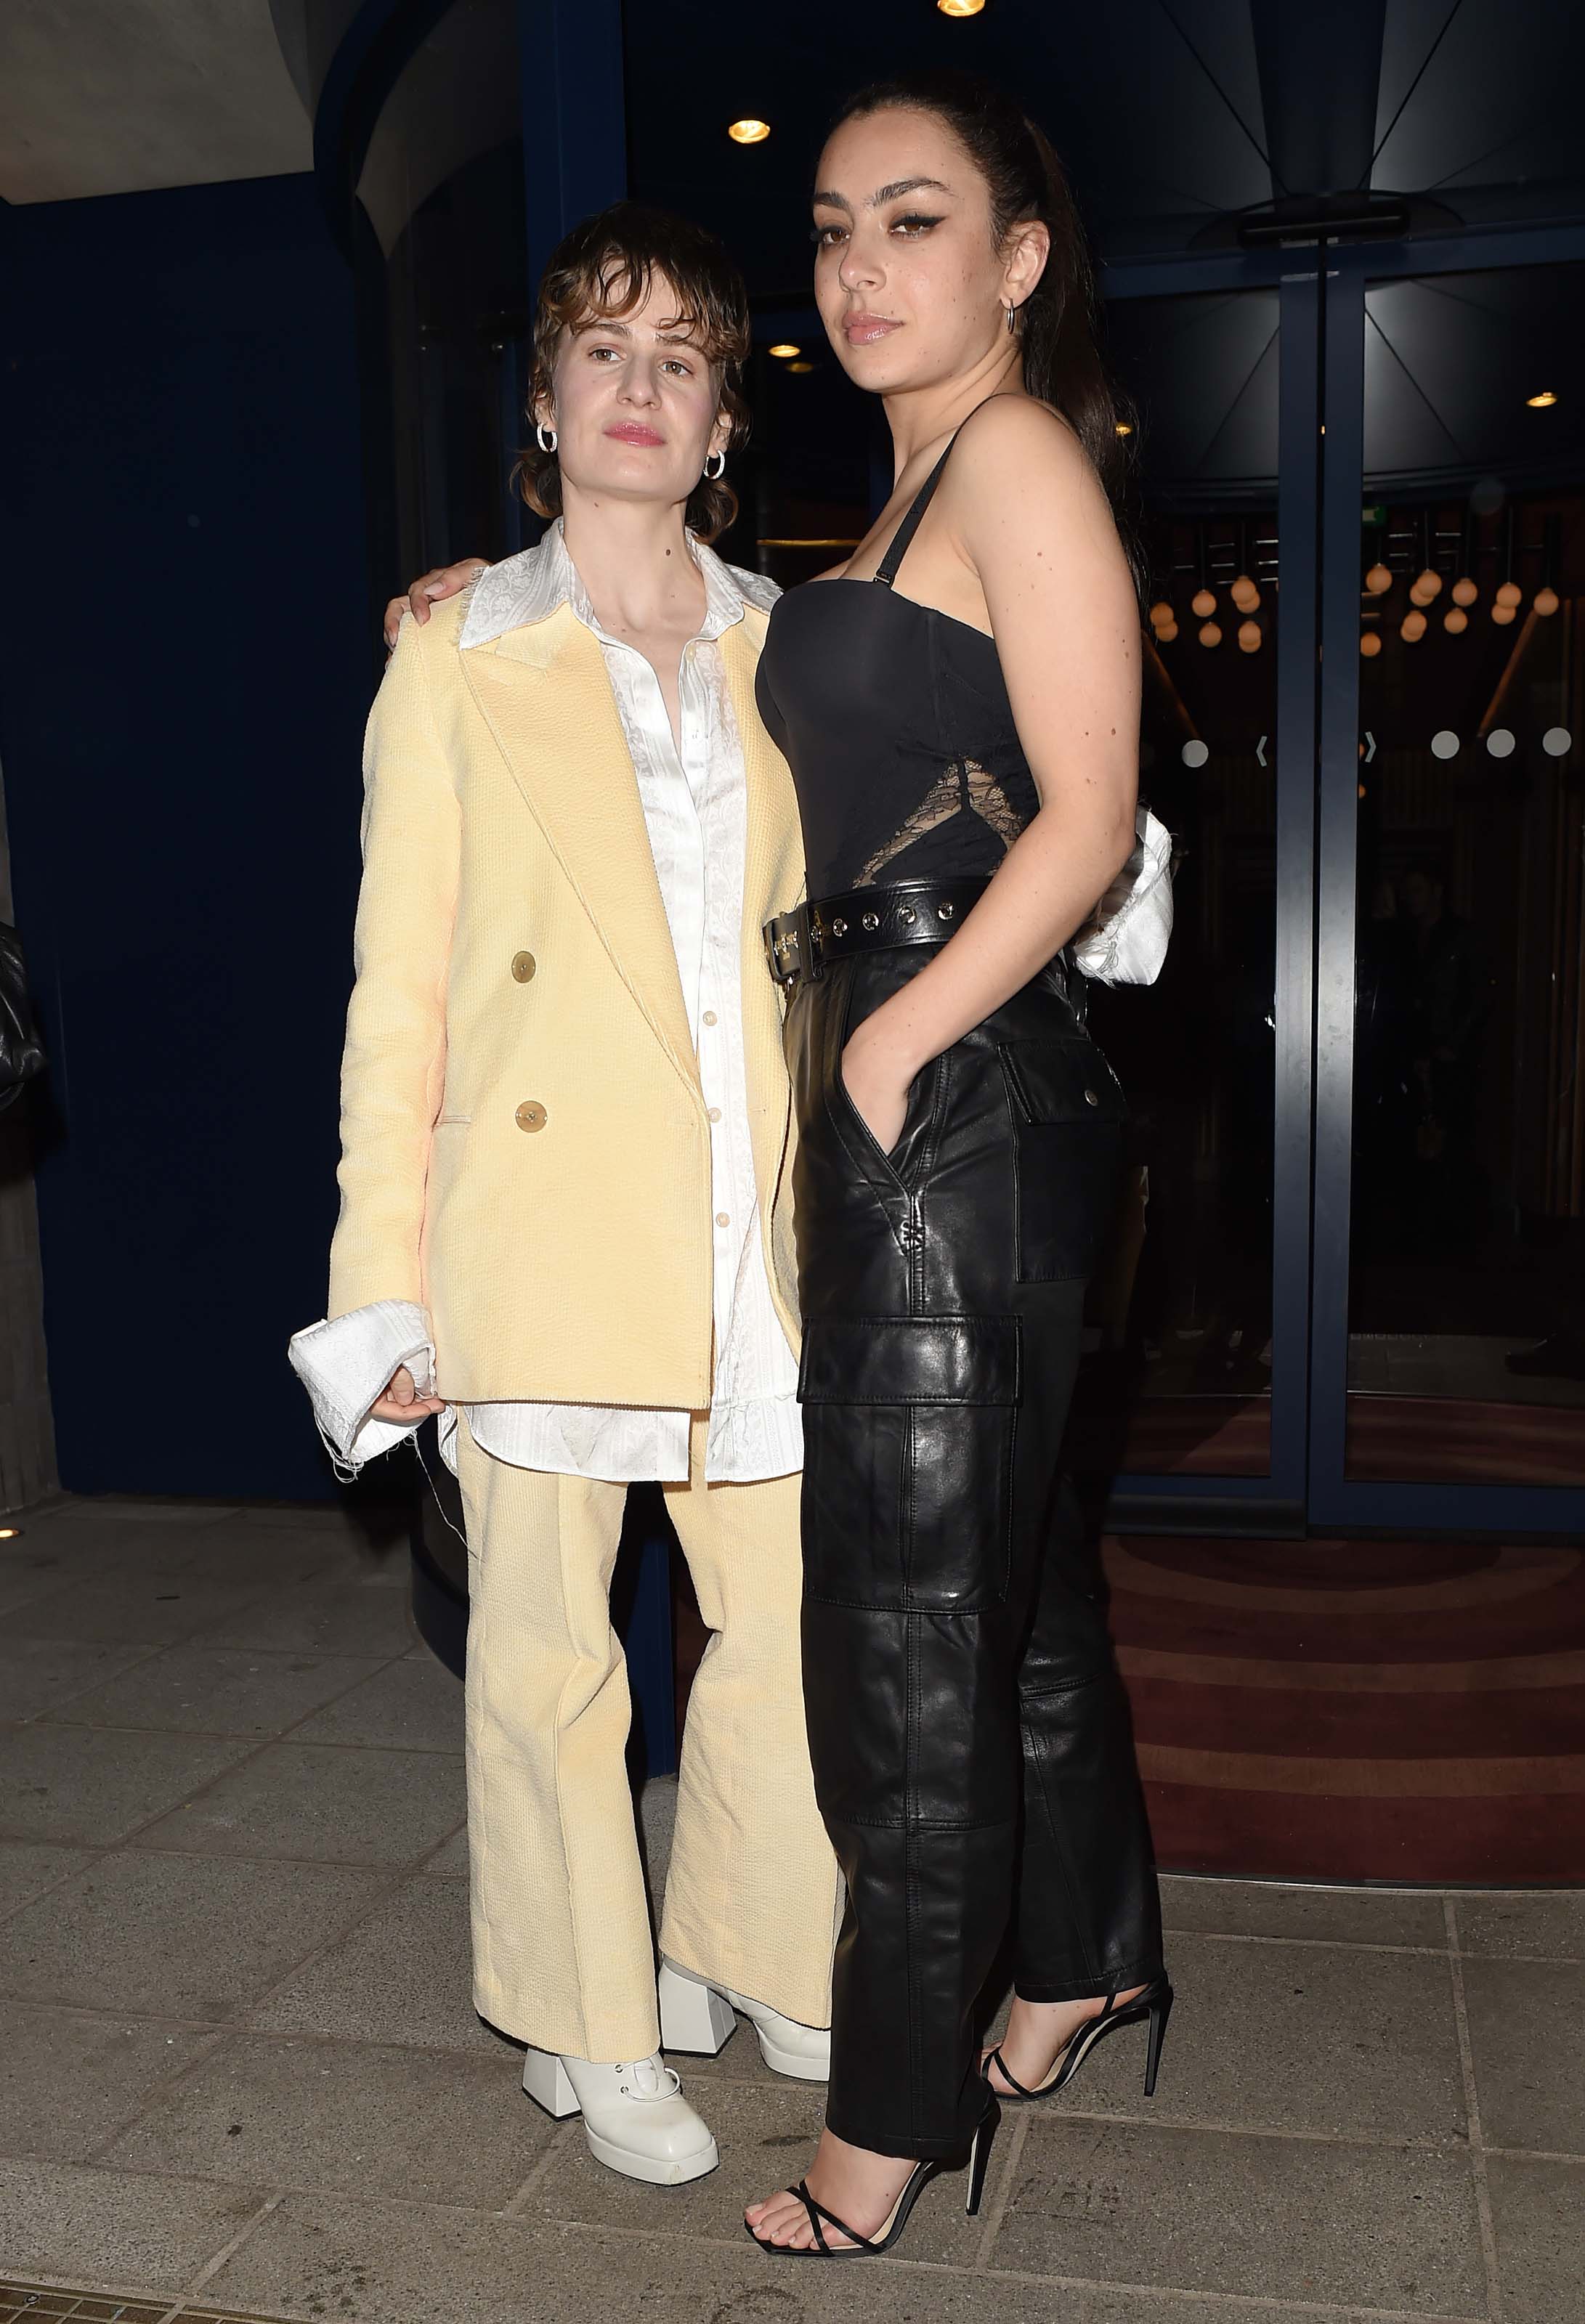 Charli XCX attends the NME Awards 2020